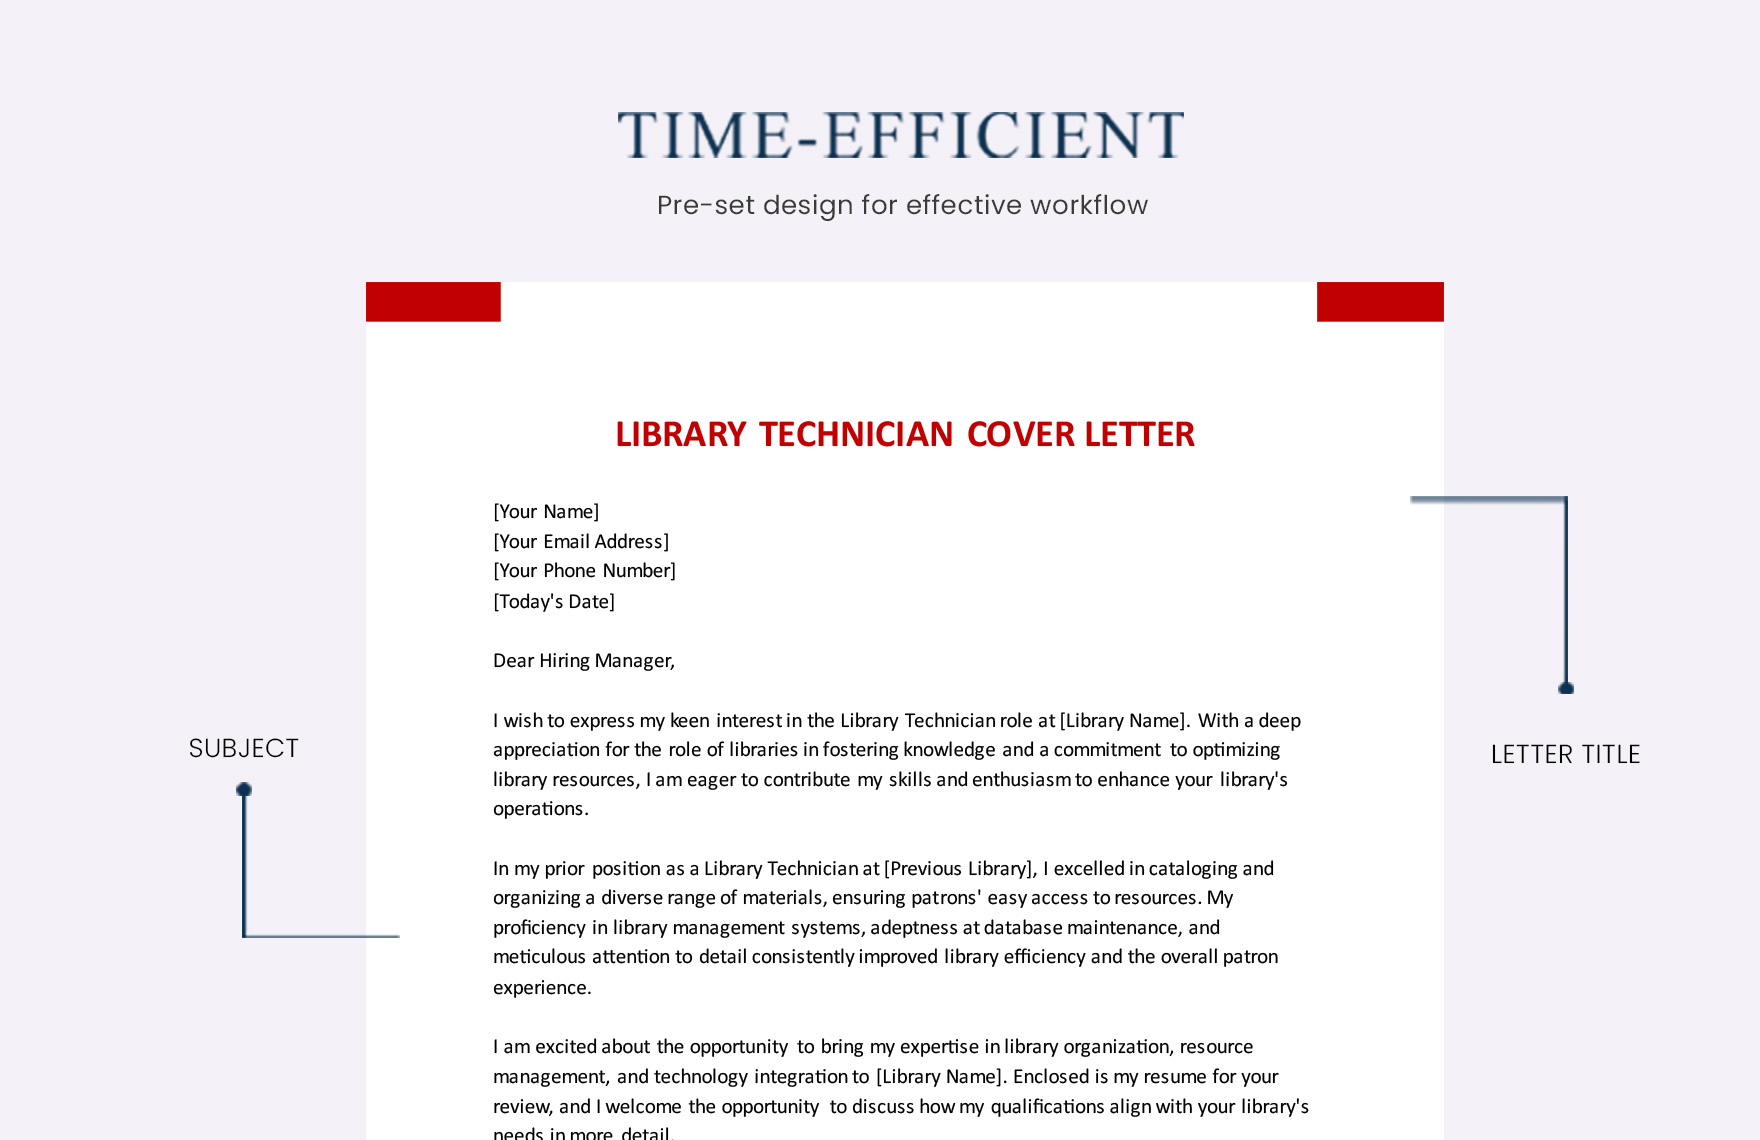 Library Technician Cover Letter